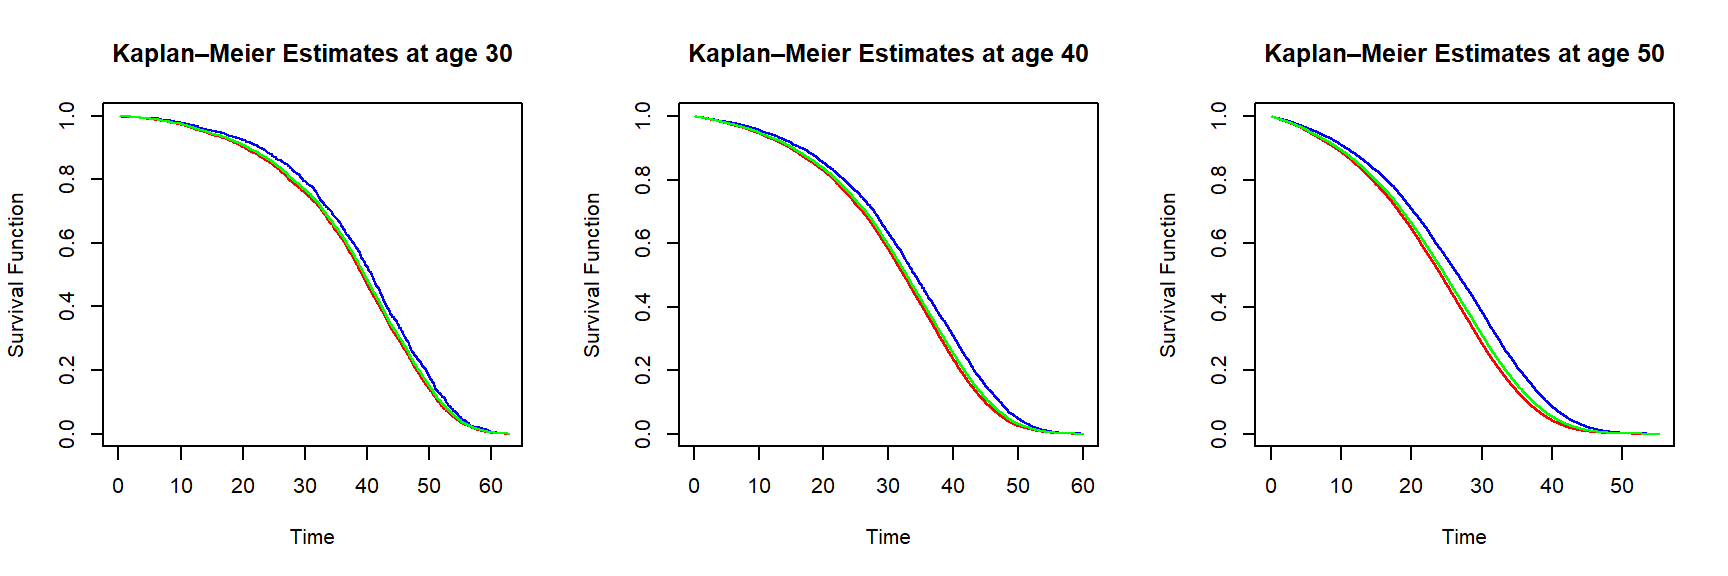 Kaplan-Meier survival function estimates for an individual of age 30 (left), 40 (middle) and 50 (right) based on the insurer dataset – curves are in blue (female), red (male) and green (all genders)